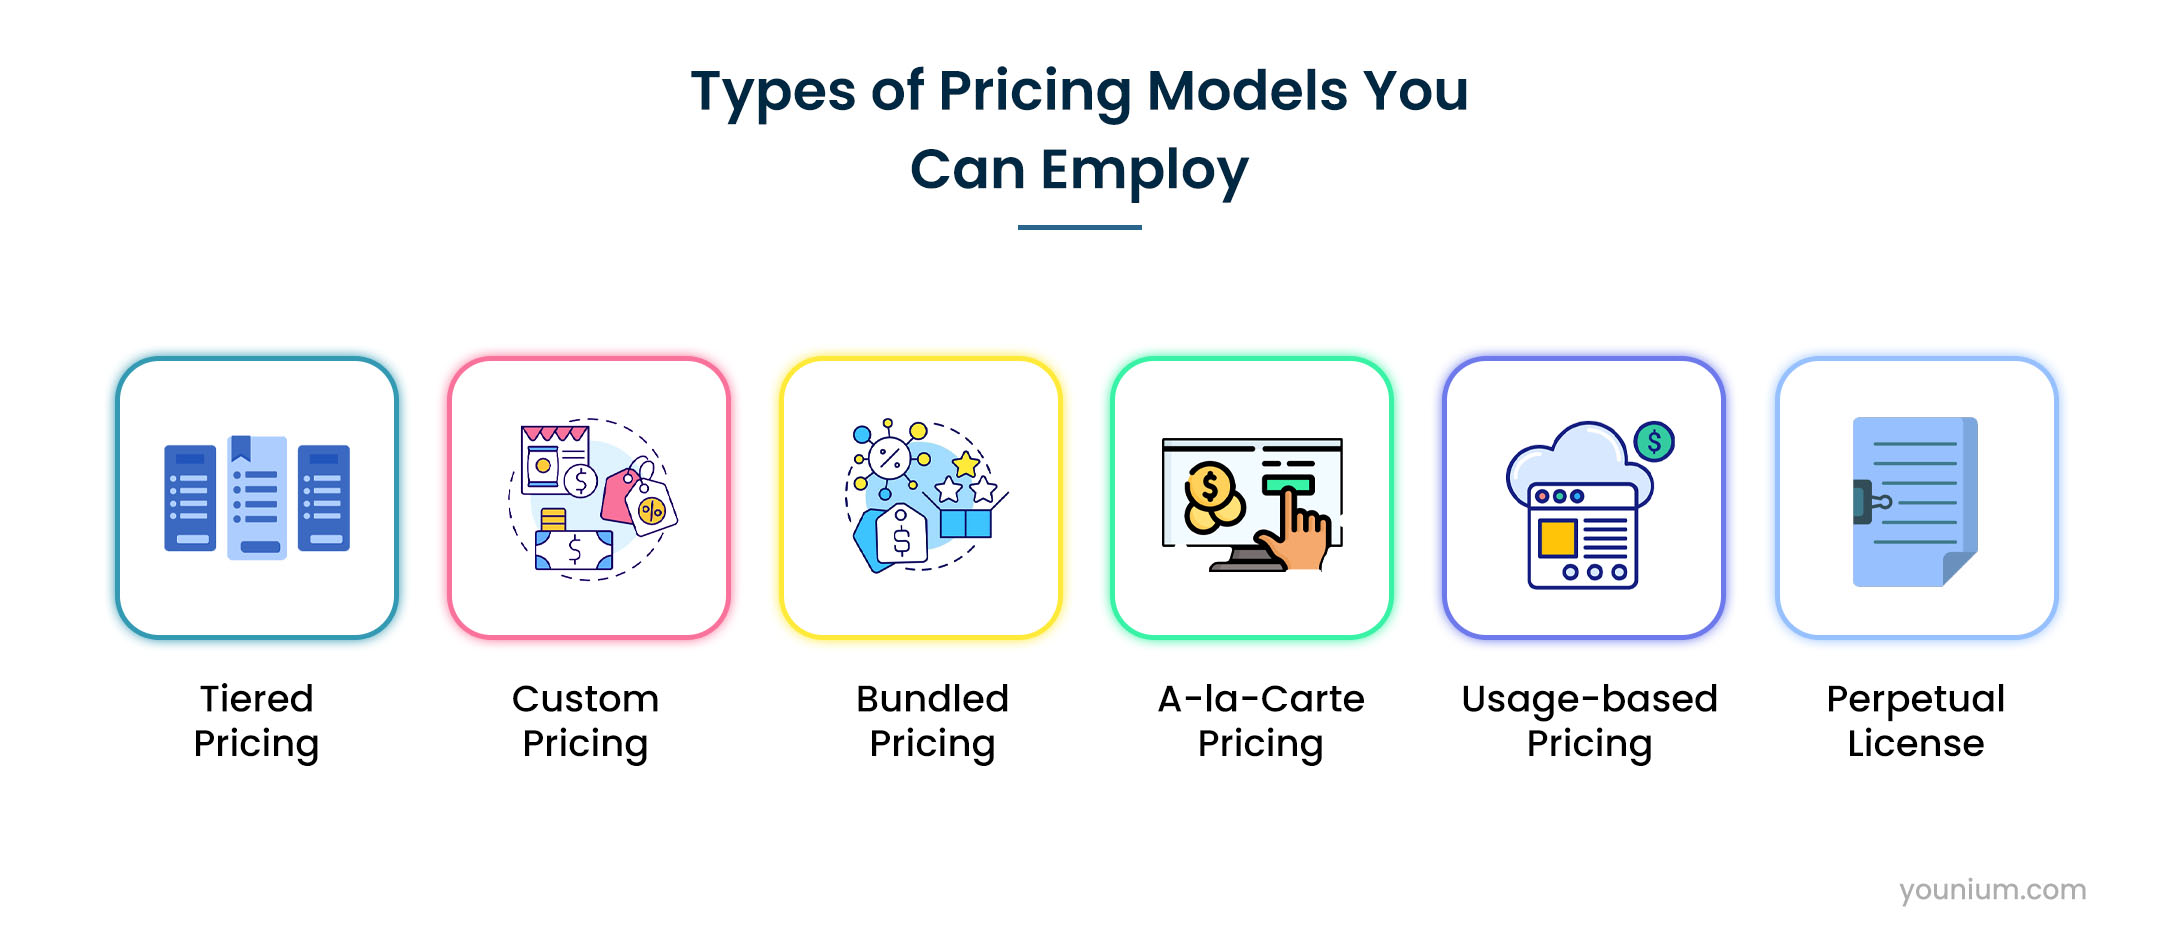 Types of Pricing Models You